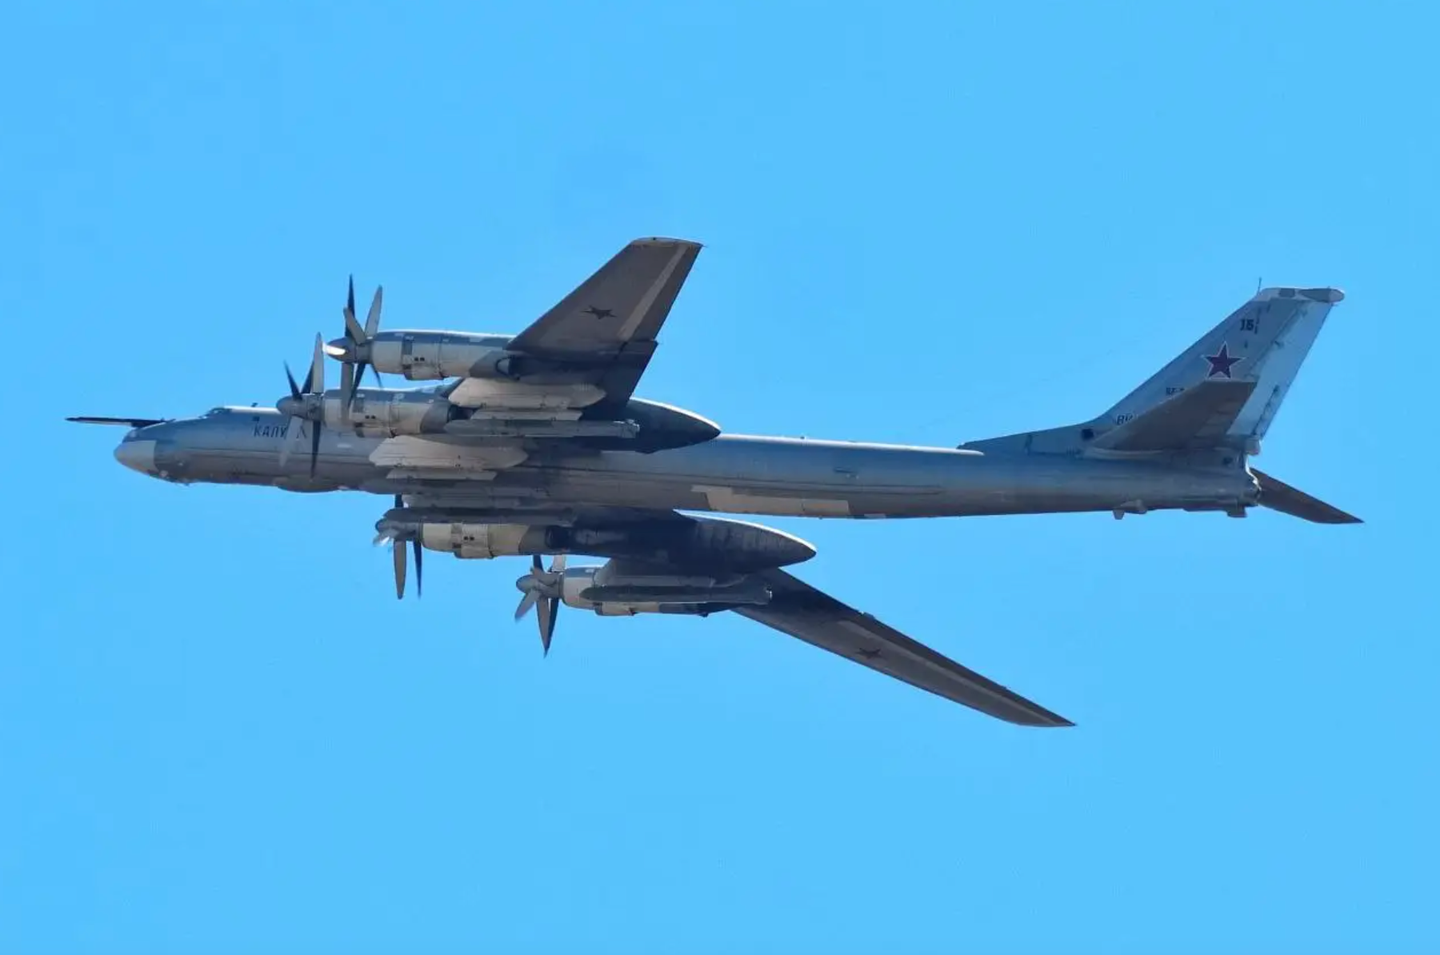 Named&nbsp;<em>Kaluga</em>, this Tu-95MS is seen carrying four Kh-101 cruise missiles in a photo published on May 10, 2022.&nbsp;<em>Fighterbomber/Telegram</em>